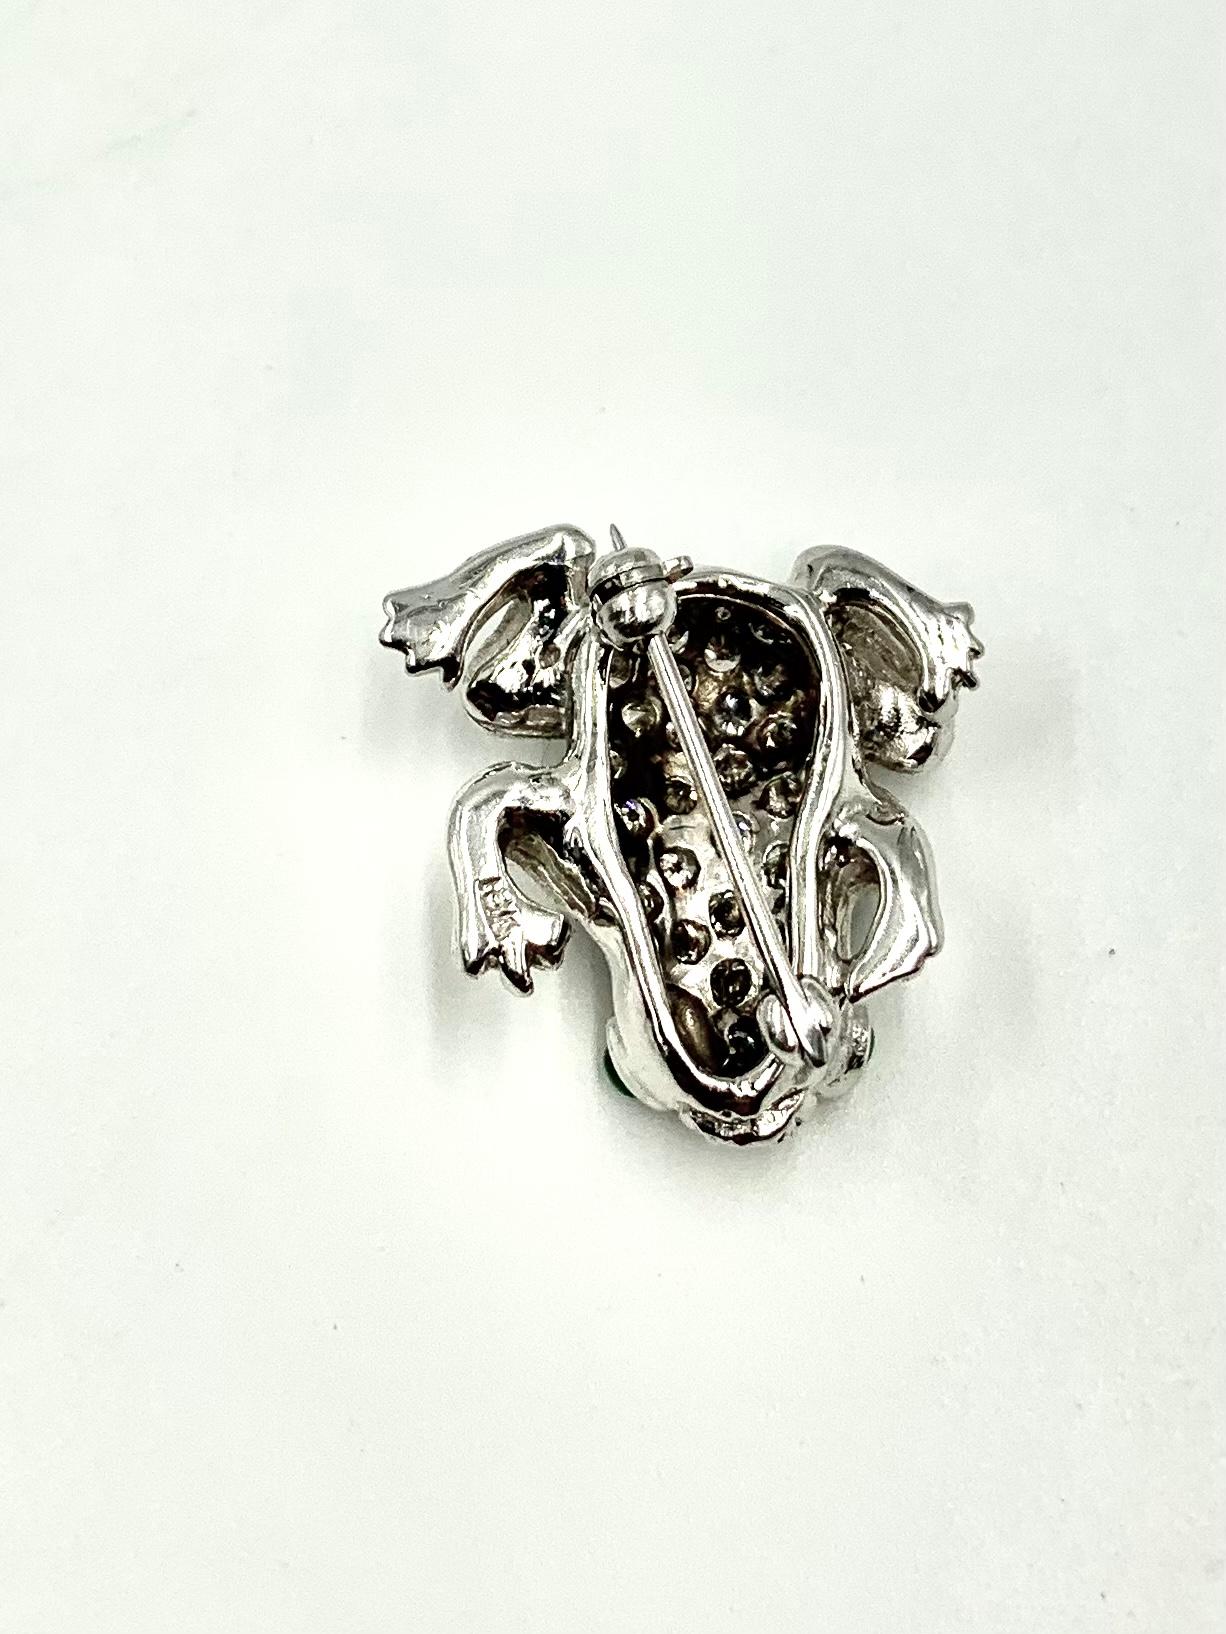 Romantic Diamond 18K White Gold Frog Brooch, Pendant with Cabochon Emerald Eyes, Talisman For Sale